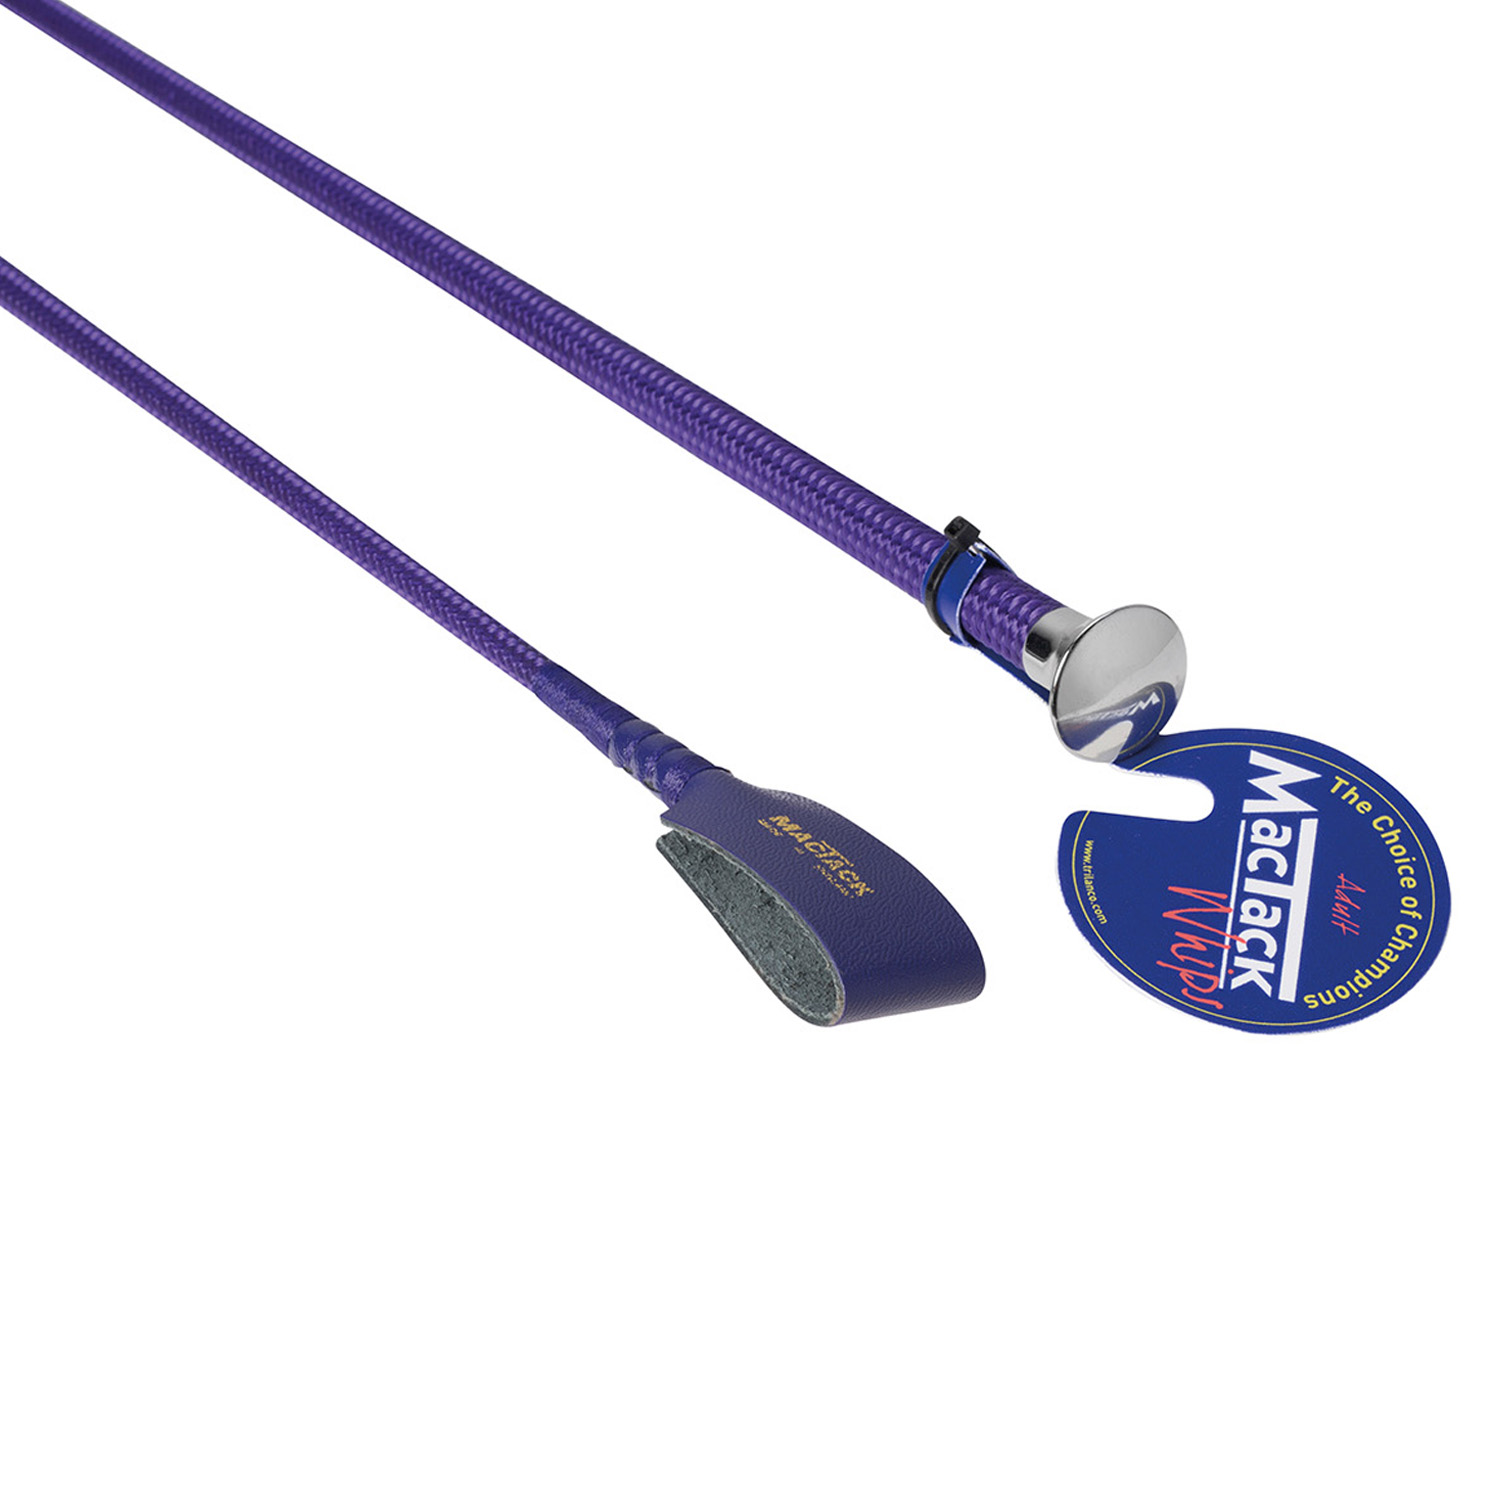 MACTACK RIDING WHIP WITH NO6 KEEPER S34 24'' PURPLE 24''